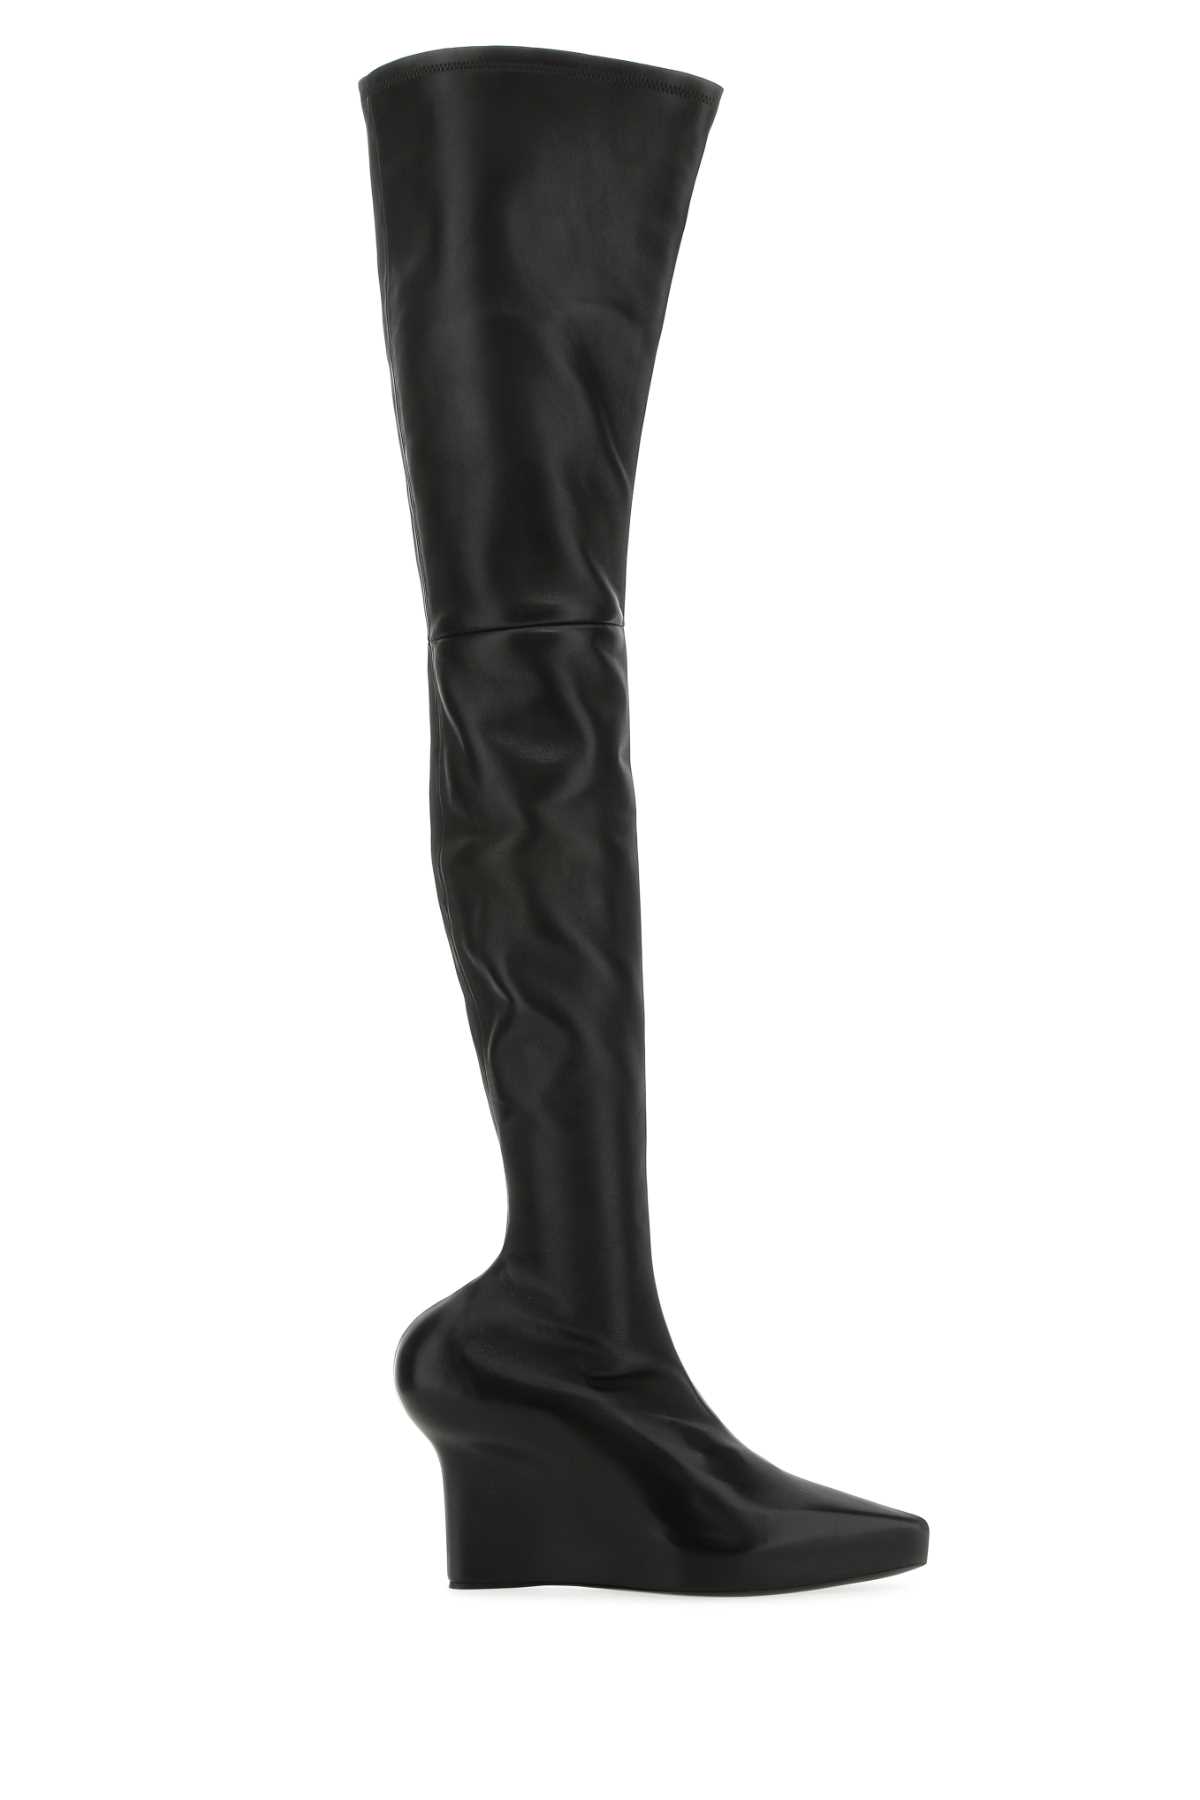 Givenchy Black Nappa Leather Show Boots